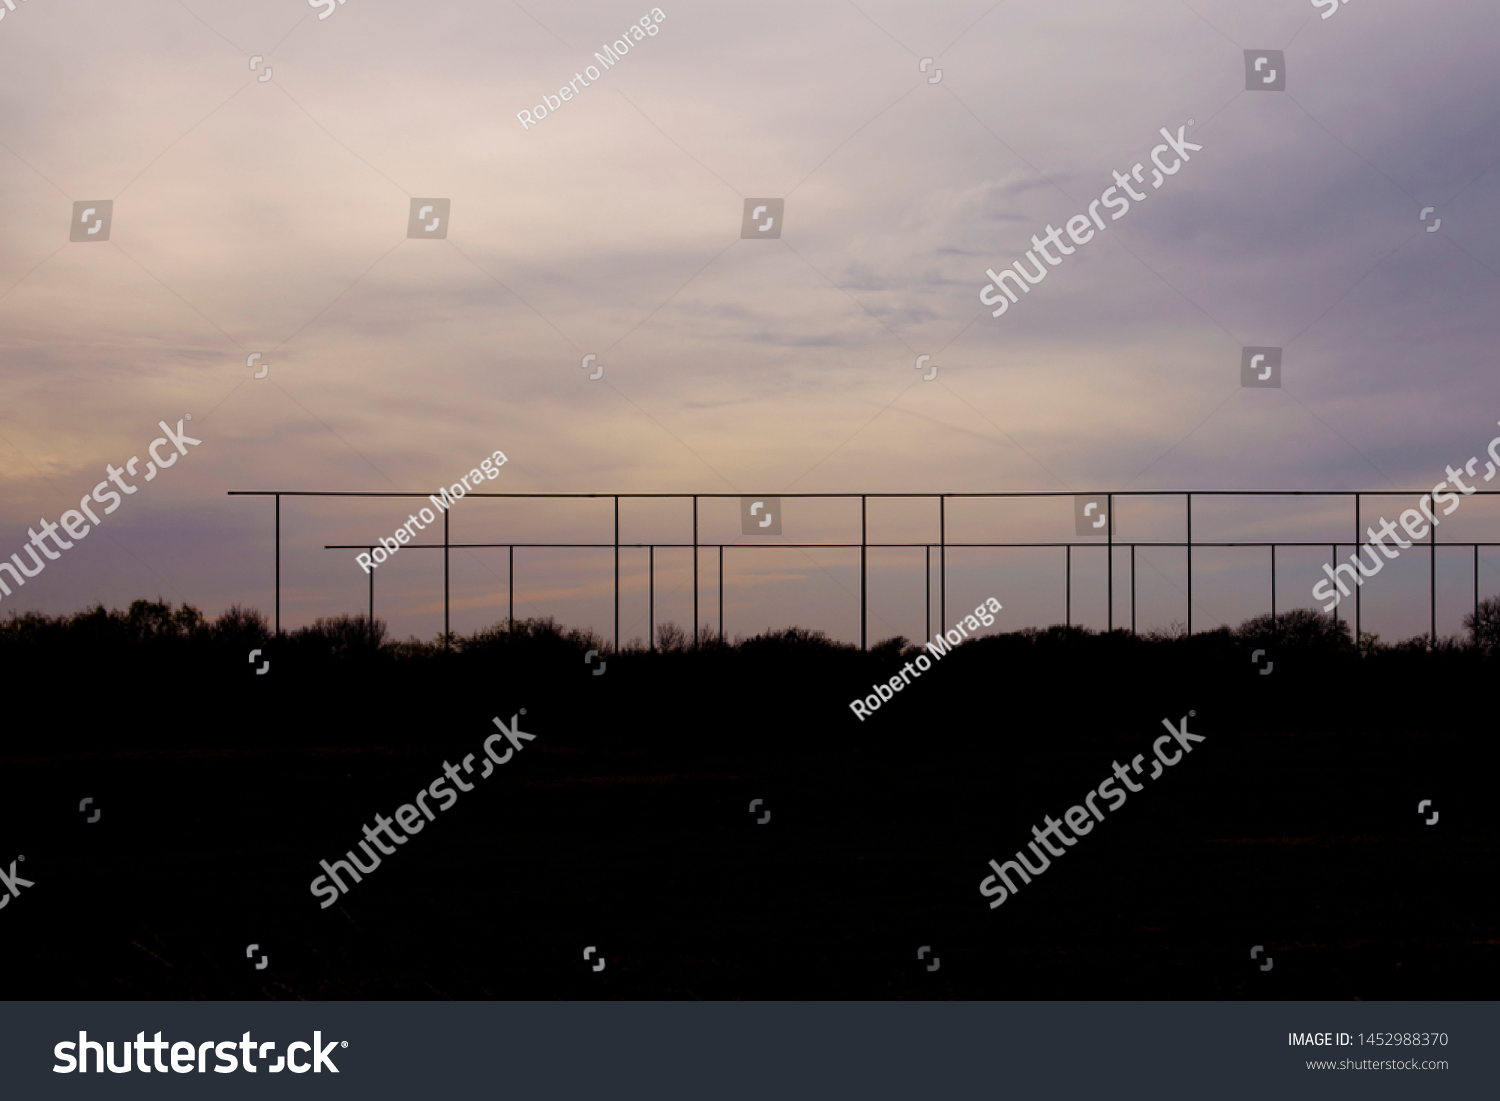 Stock Photo The Space Is Build With Light And Lines But We Only See The Absence 1452988370 